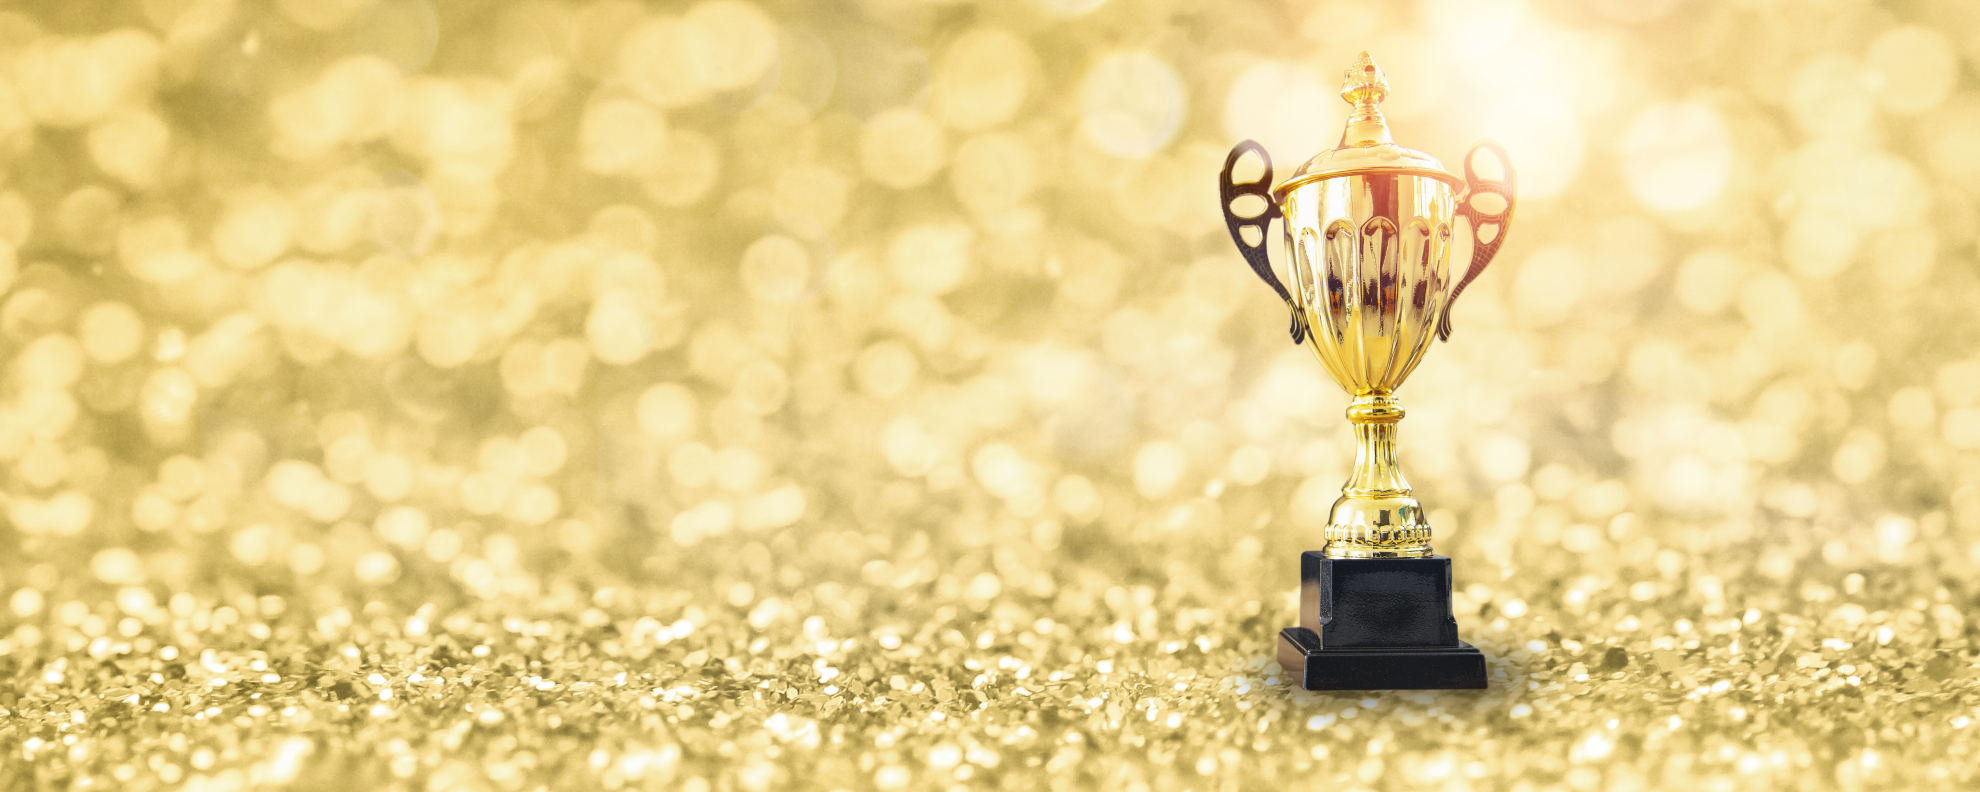 vecteezy_1st-champion-award-the-best-prize-and-winner-concept-championship-cup-or-winner-trophy-on-golden-floor-with-bokeh-background_2437431